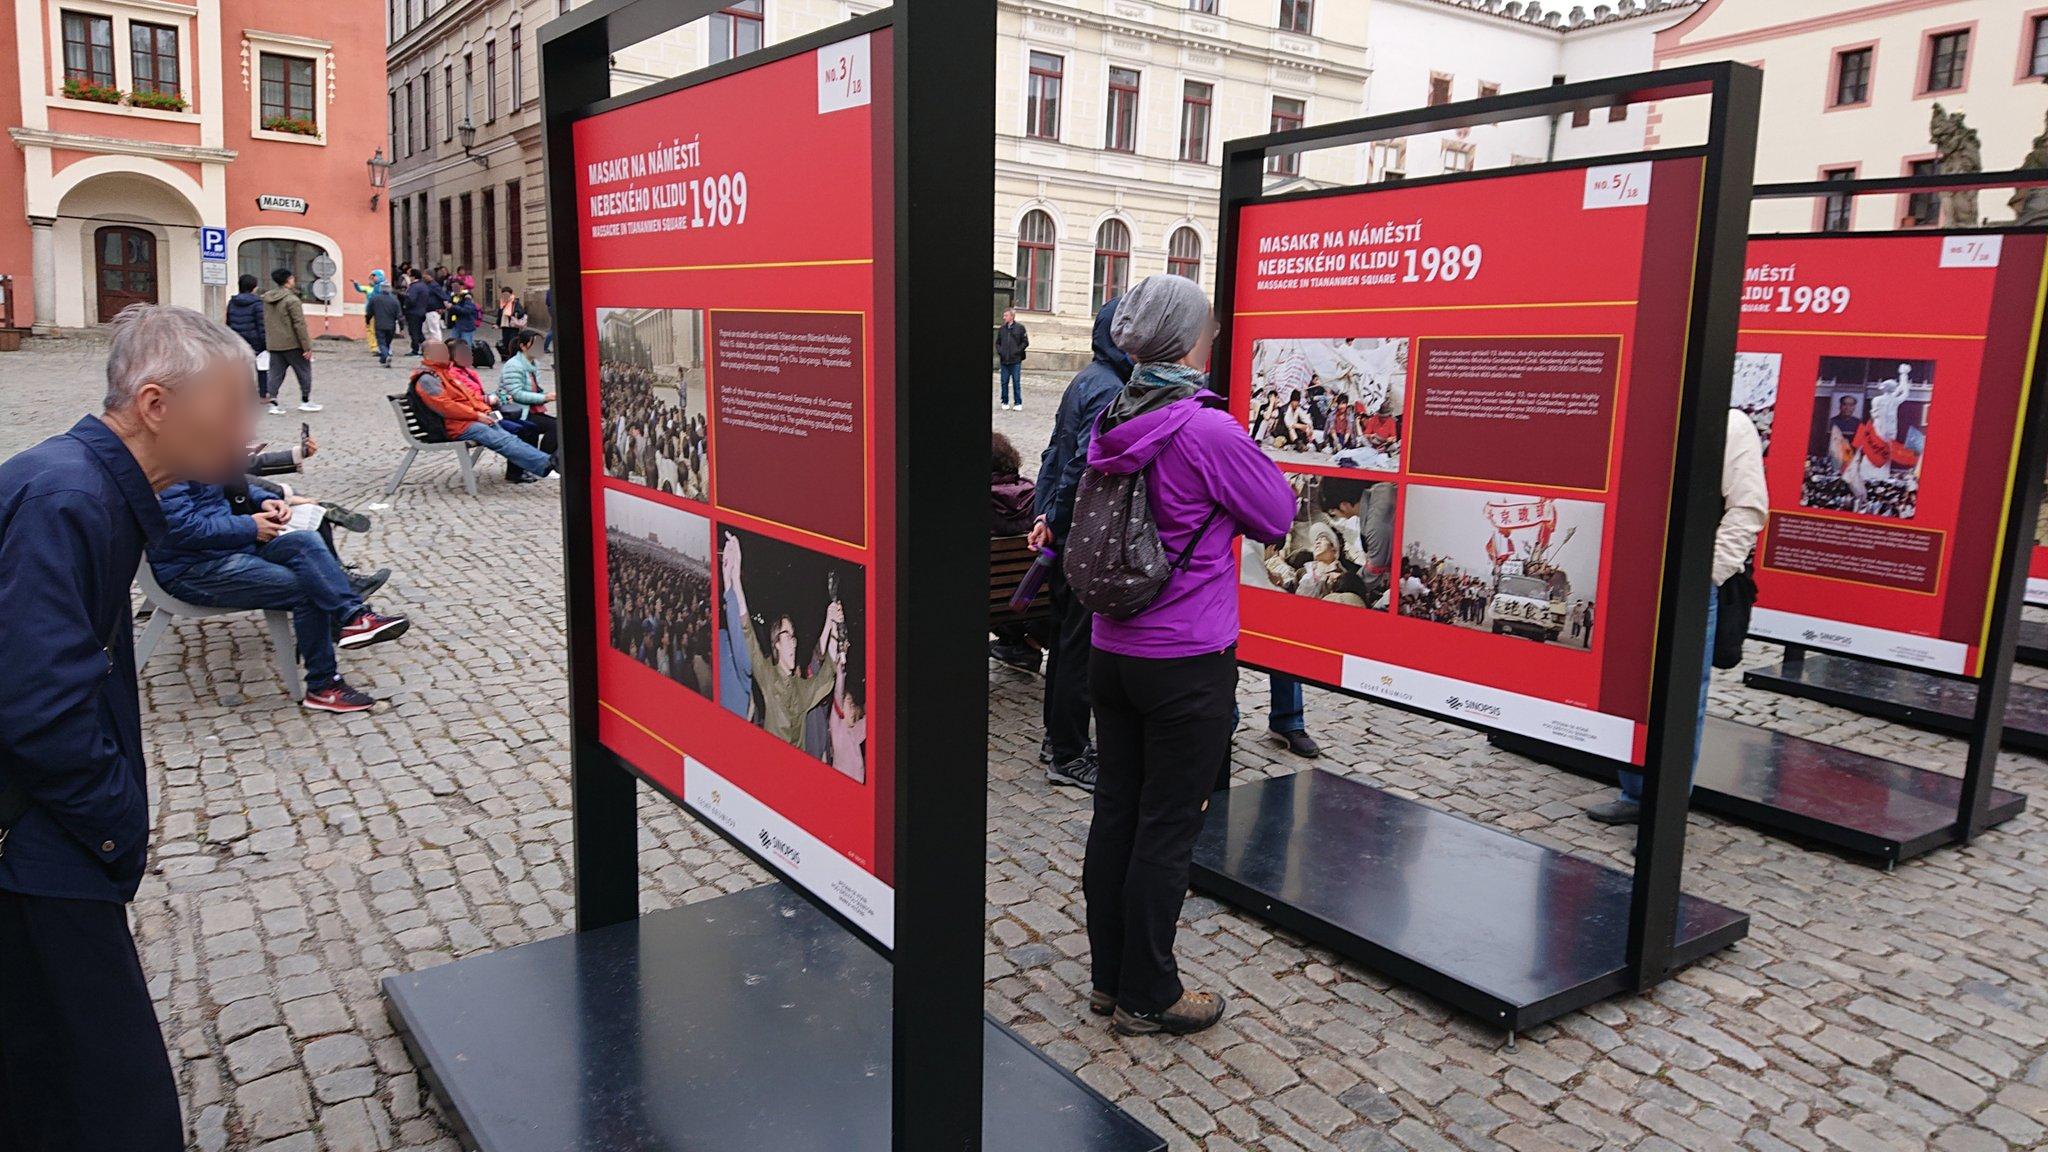 ?eský Krumlov, a popular destination for Chinese tourists, has put out signs about the history of Tiananmen Square